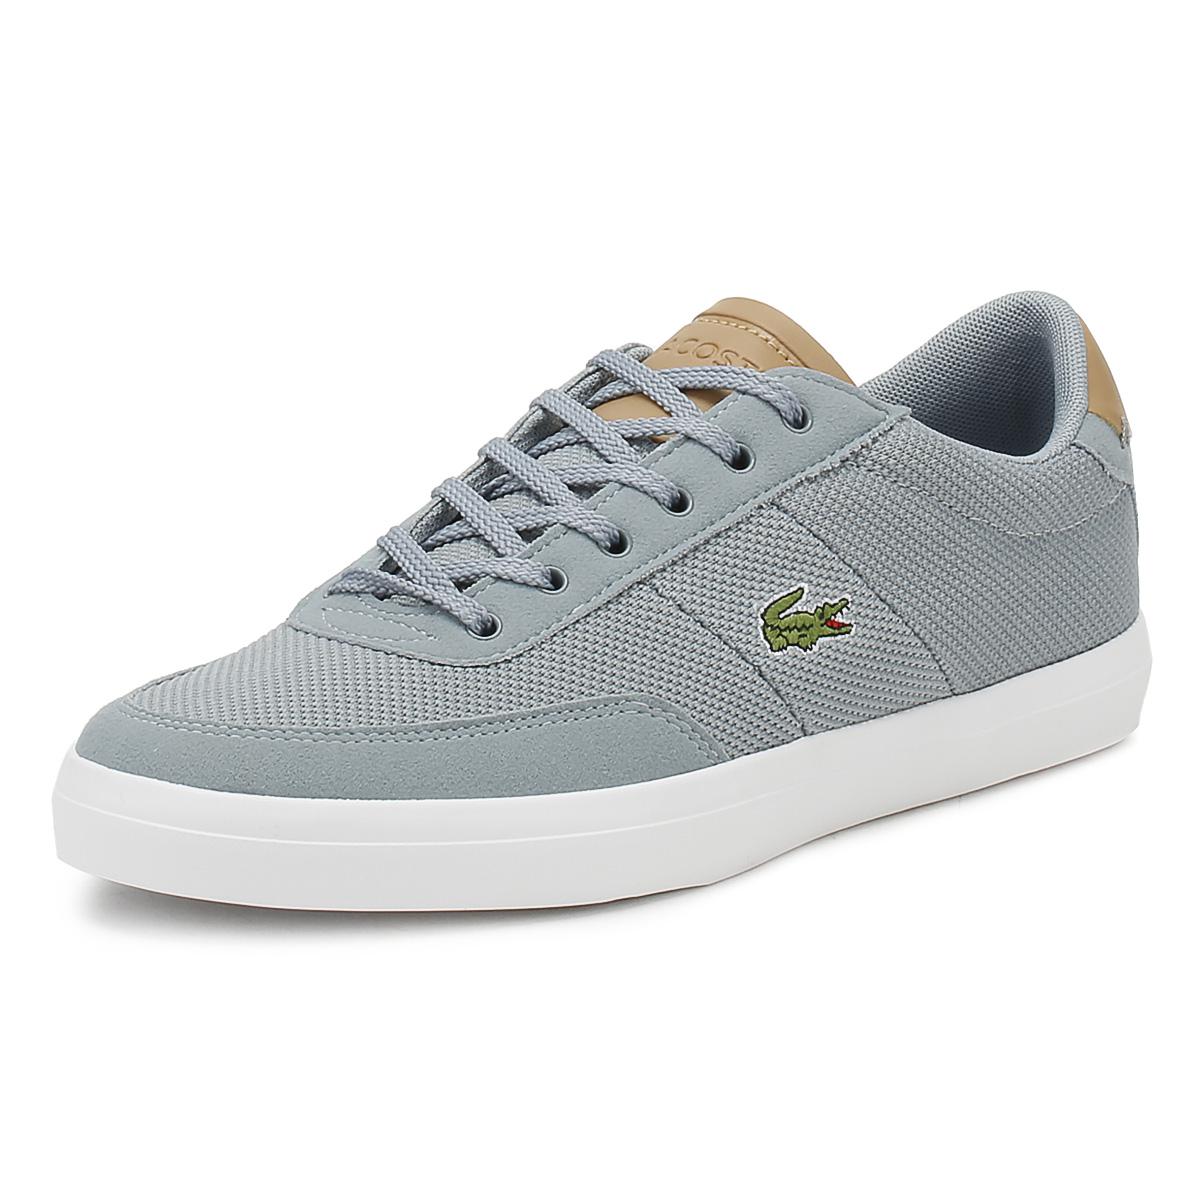 Lacoste Rubber Mens Grey/ Light Tan Court Master 118 1 Trainers in Gray ...